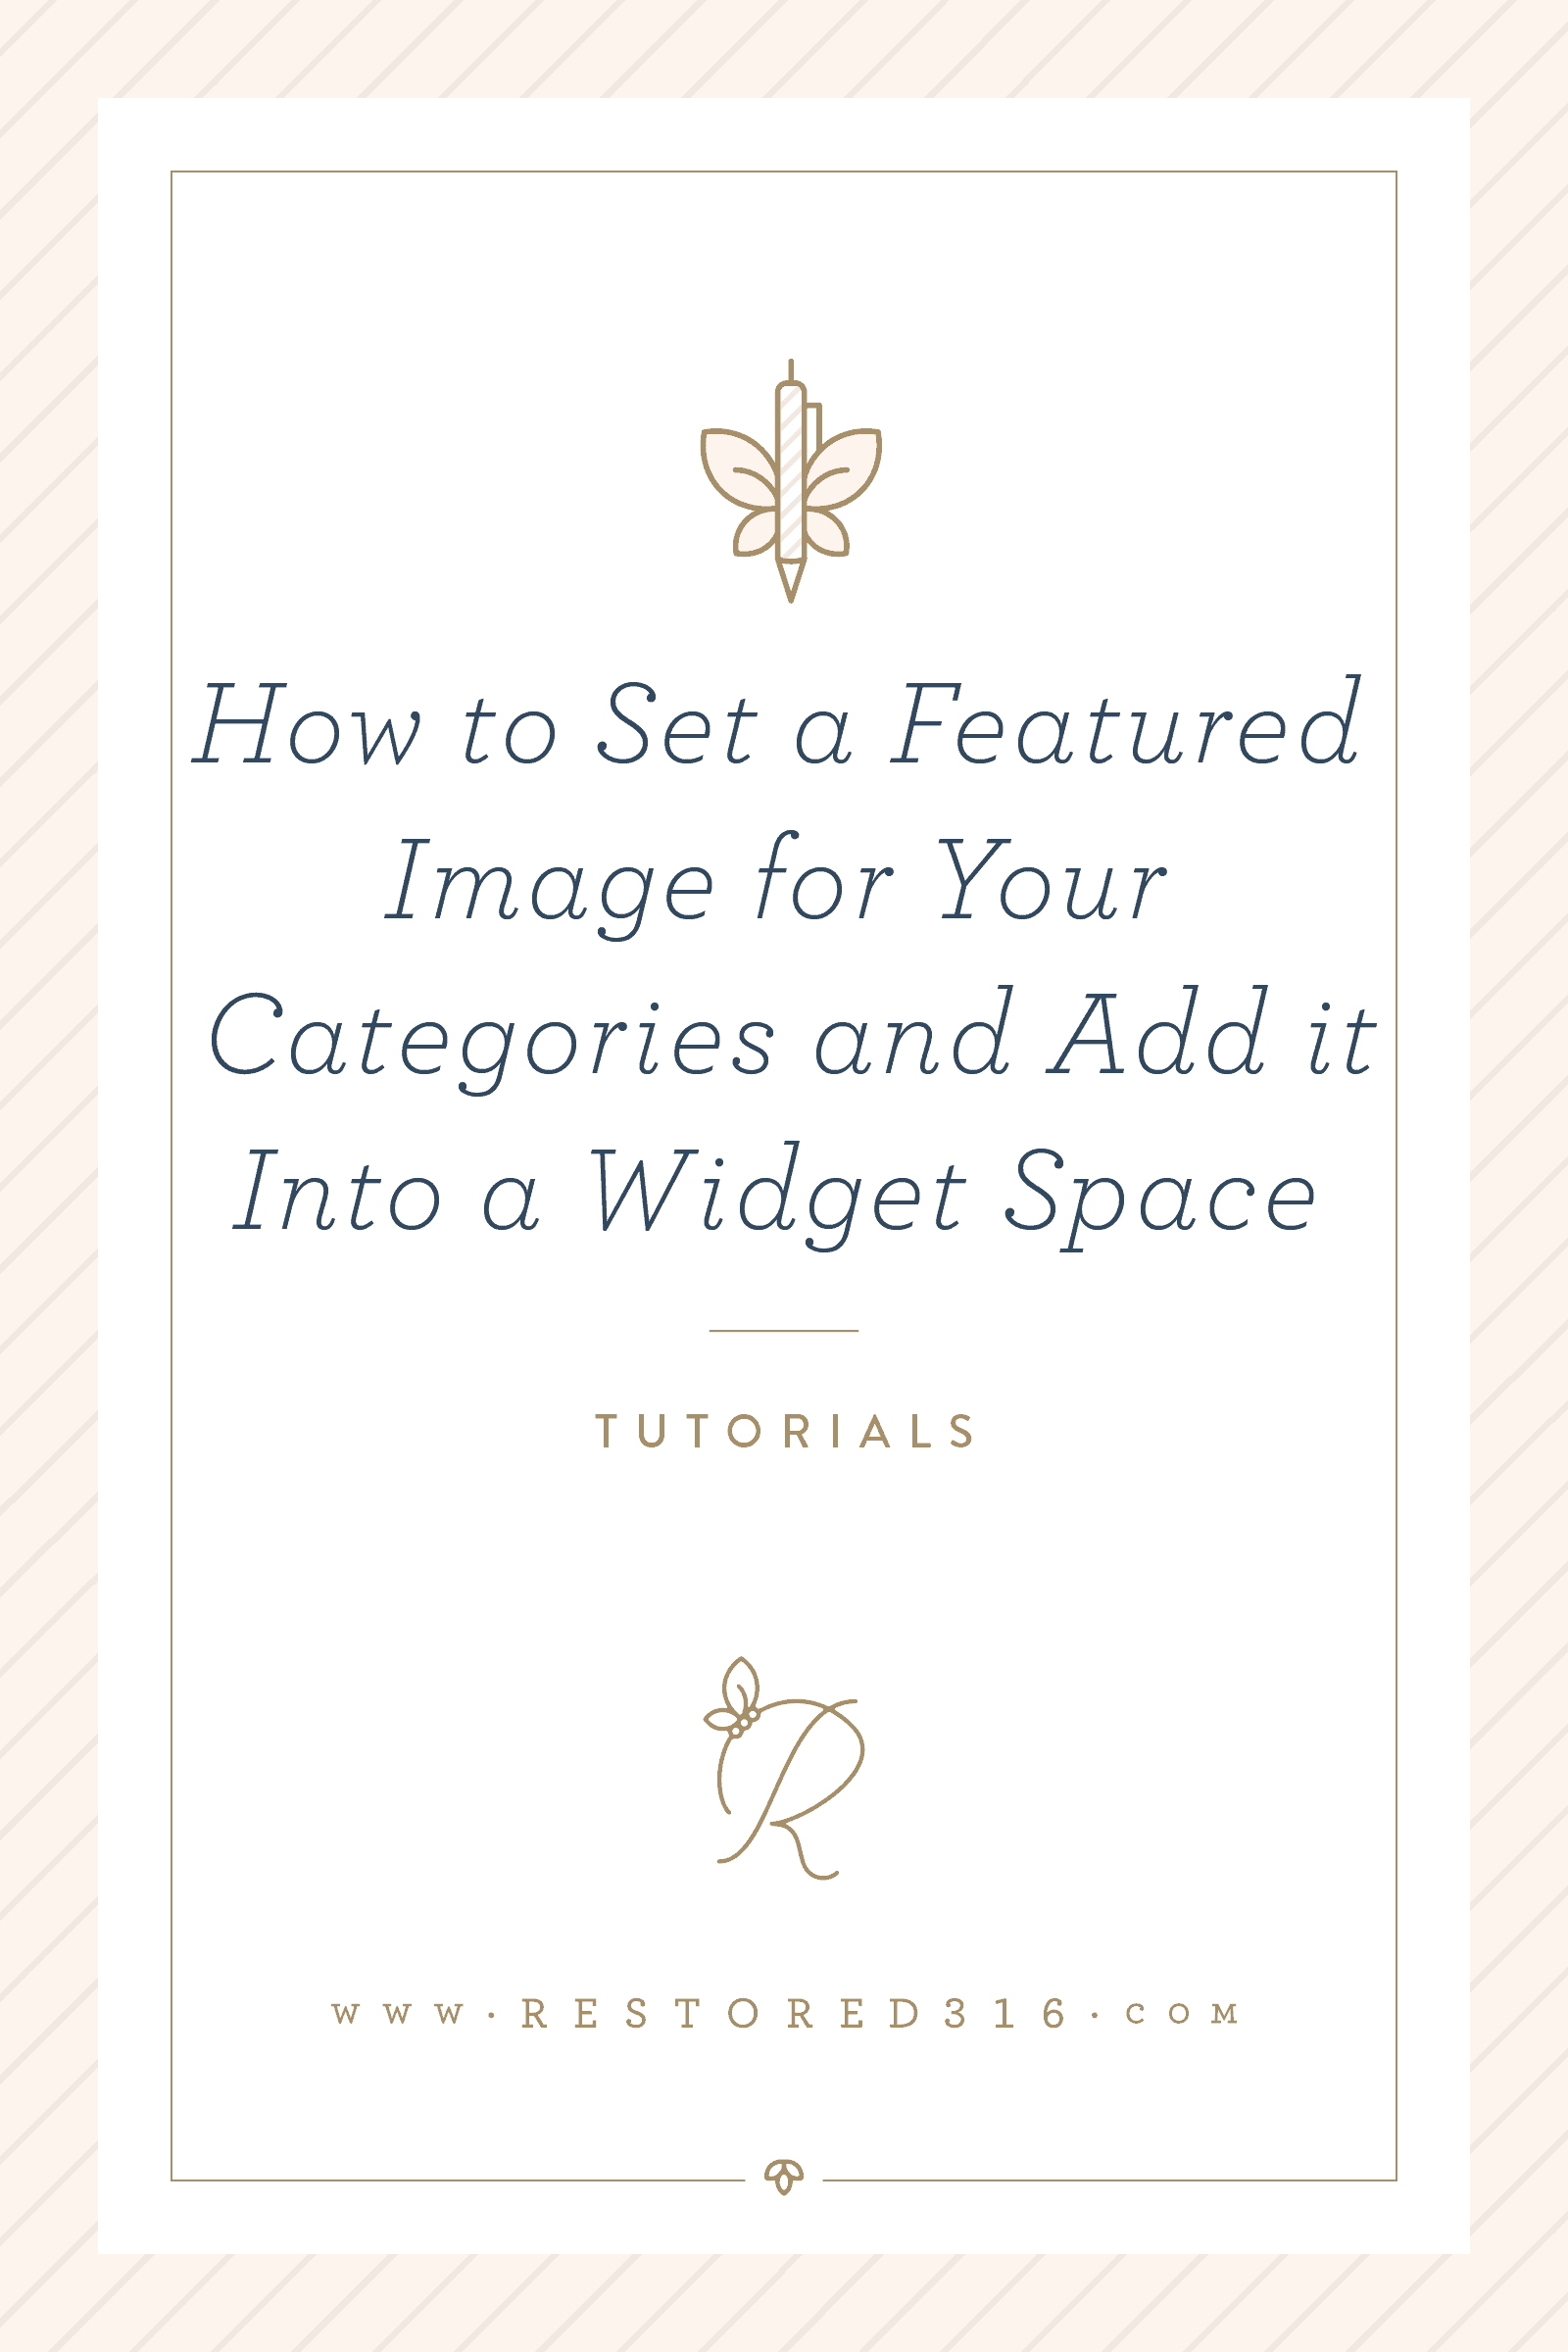 How to set a featured image for your categories and add it into a widget space